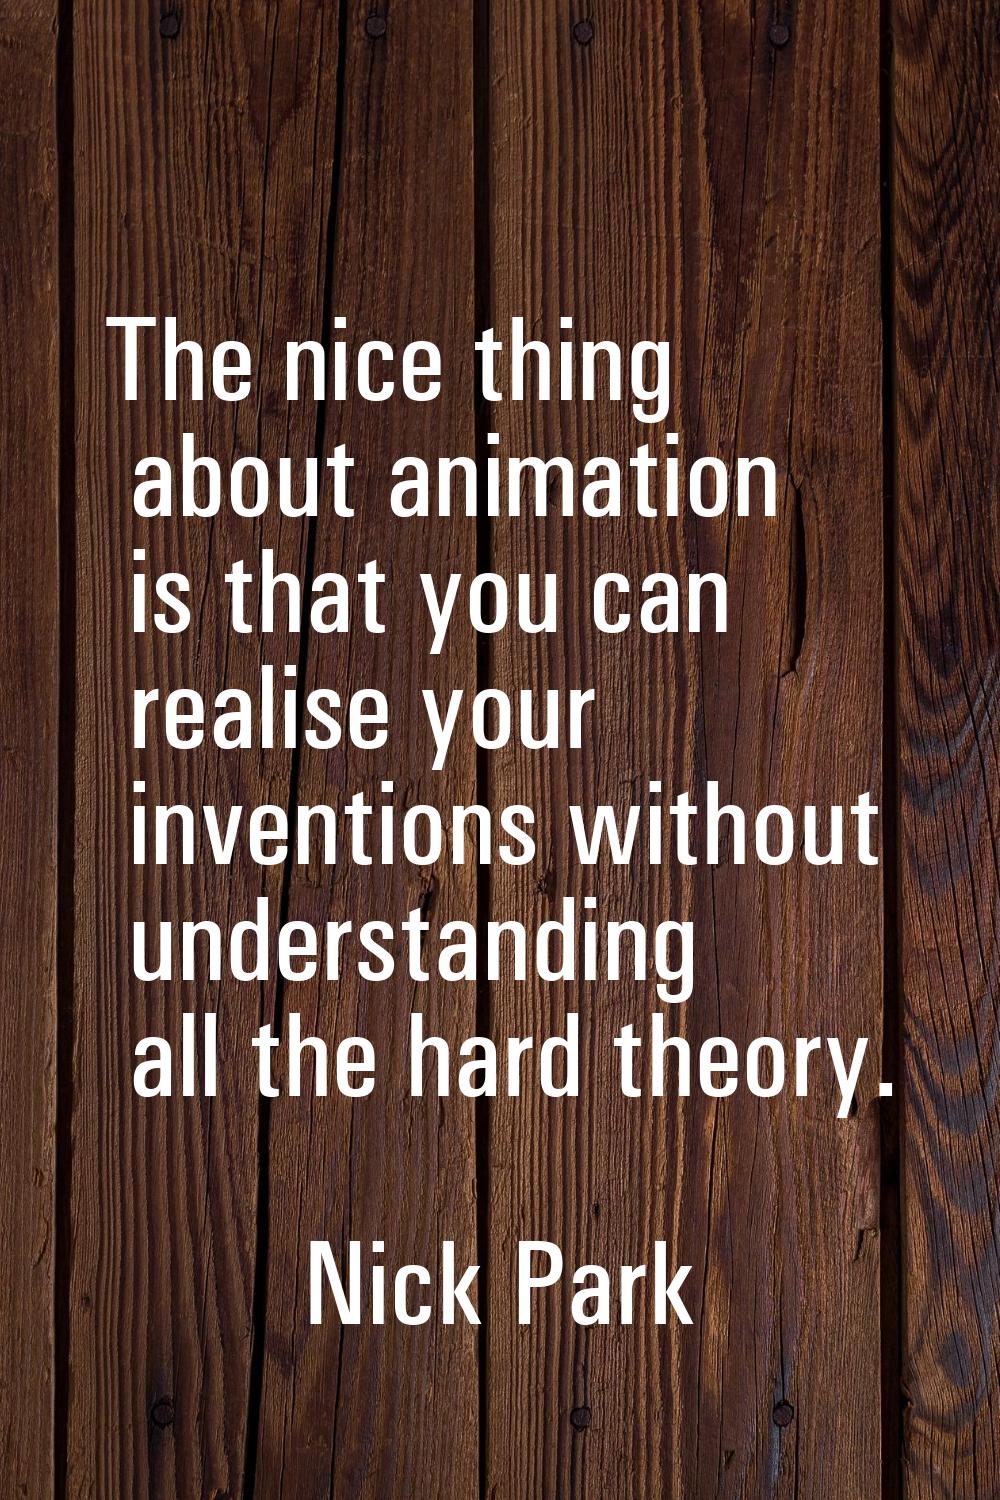 The nice thing about animation is that you can realise your inventions without understanding all th